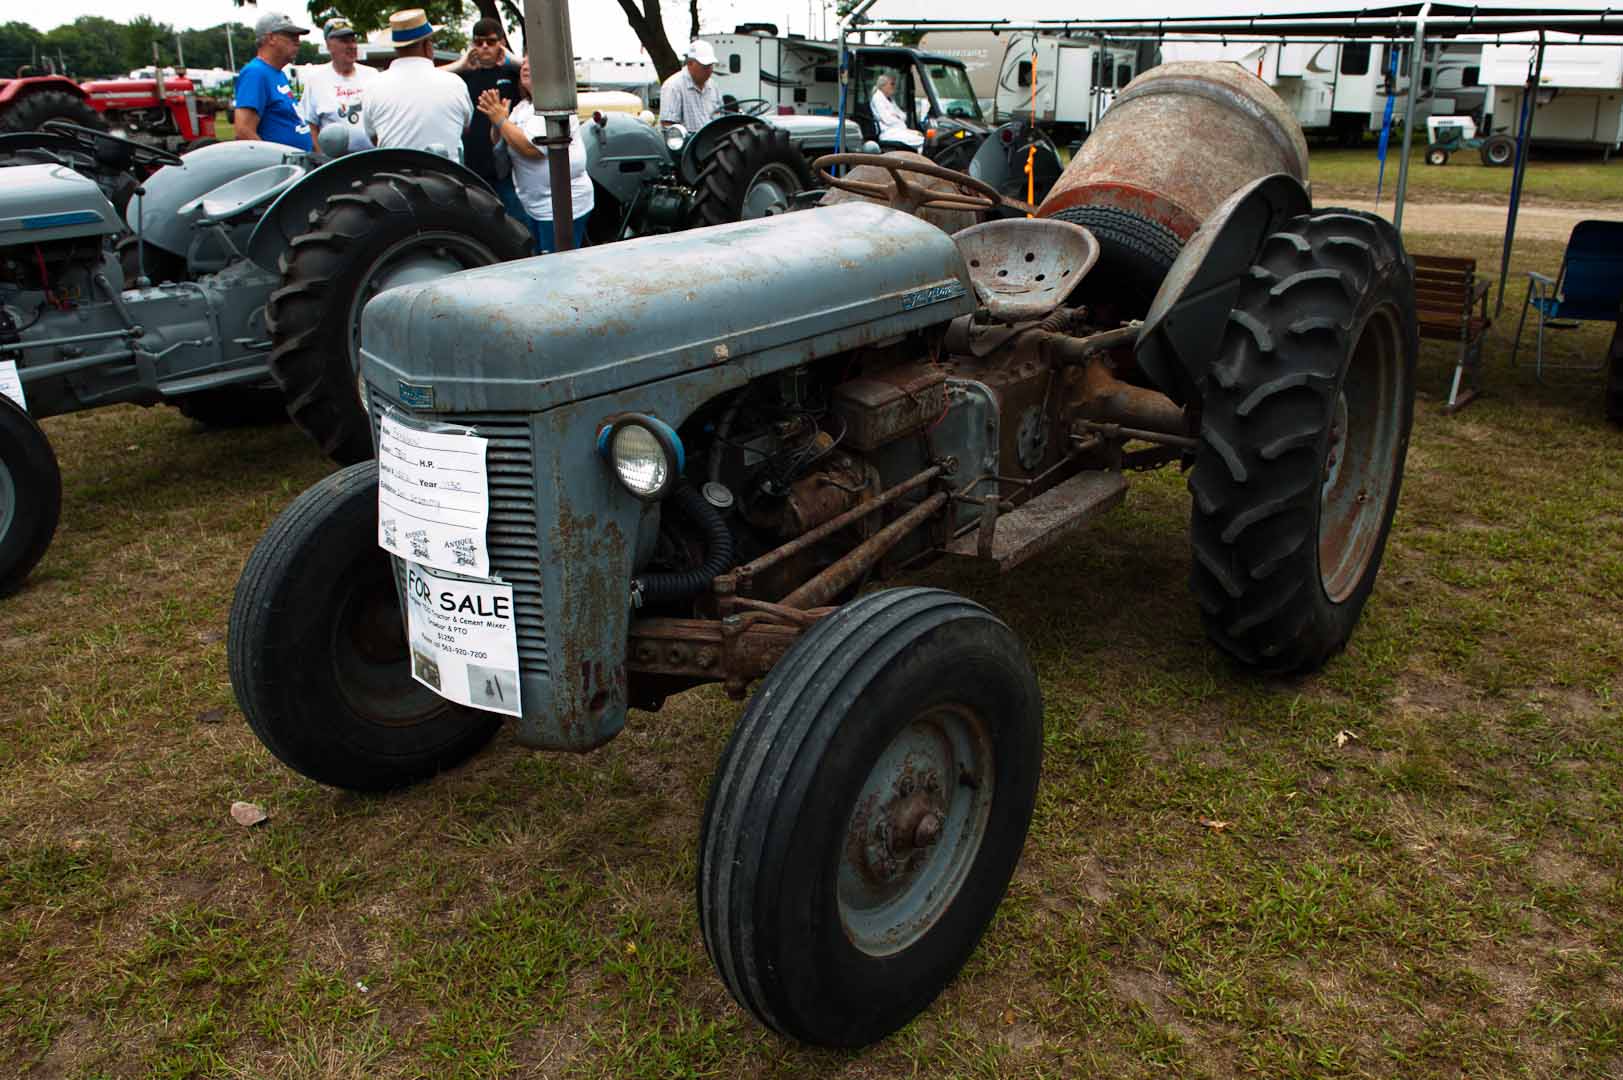 1950 TE-20 owned by Dan Drummy. SN TE-140276. Tractor was for sale.